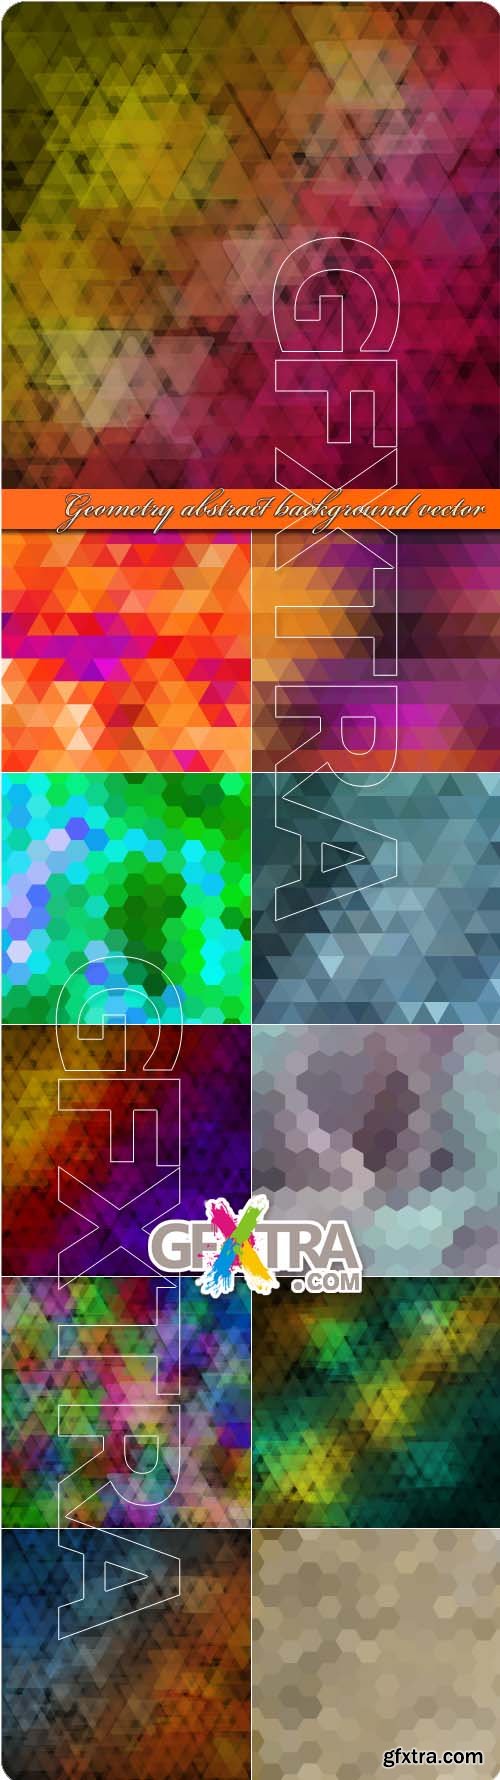 Geometry abstract background vector